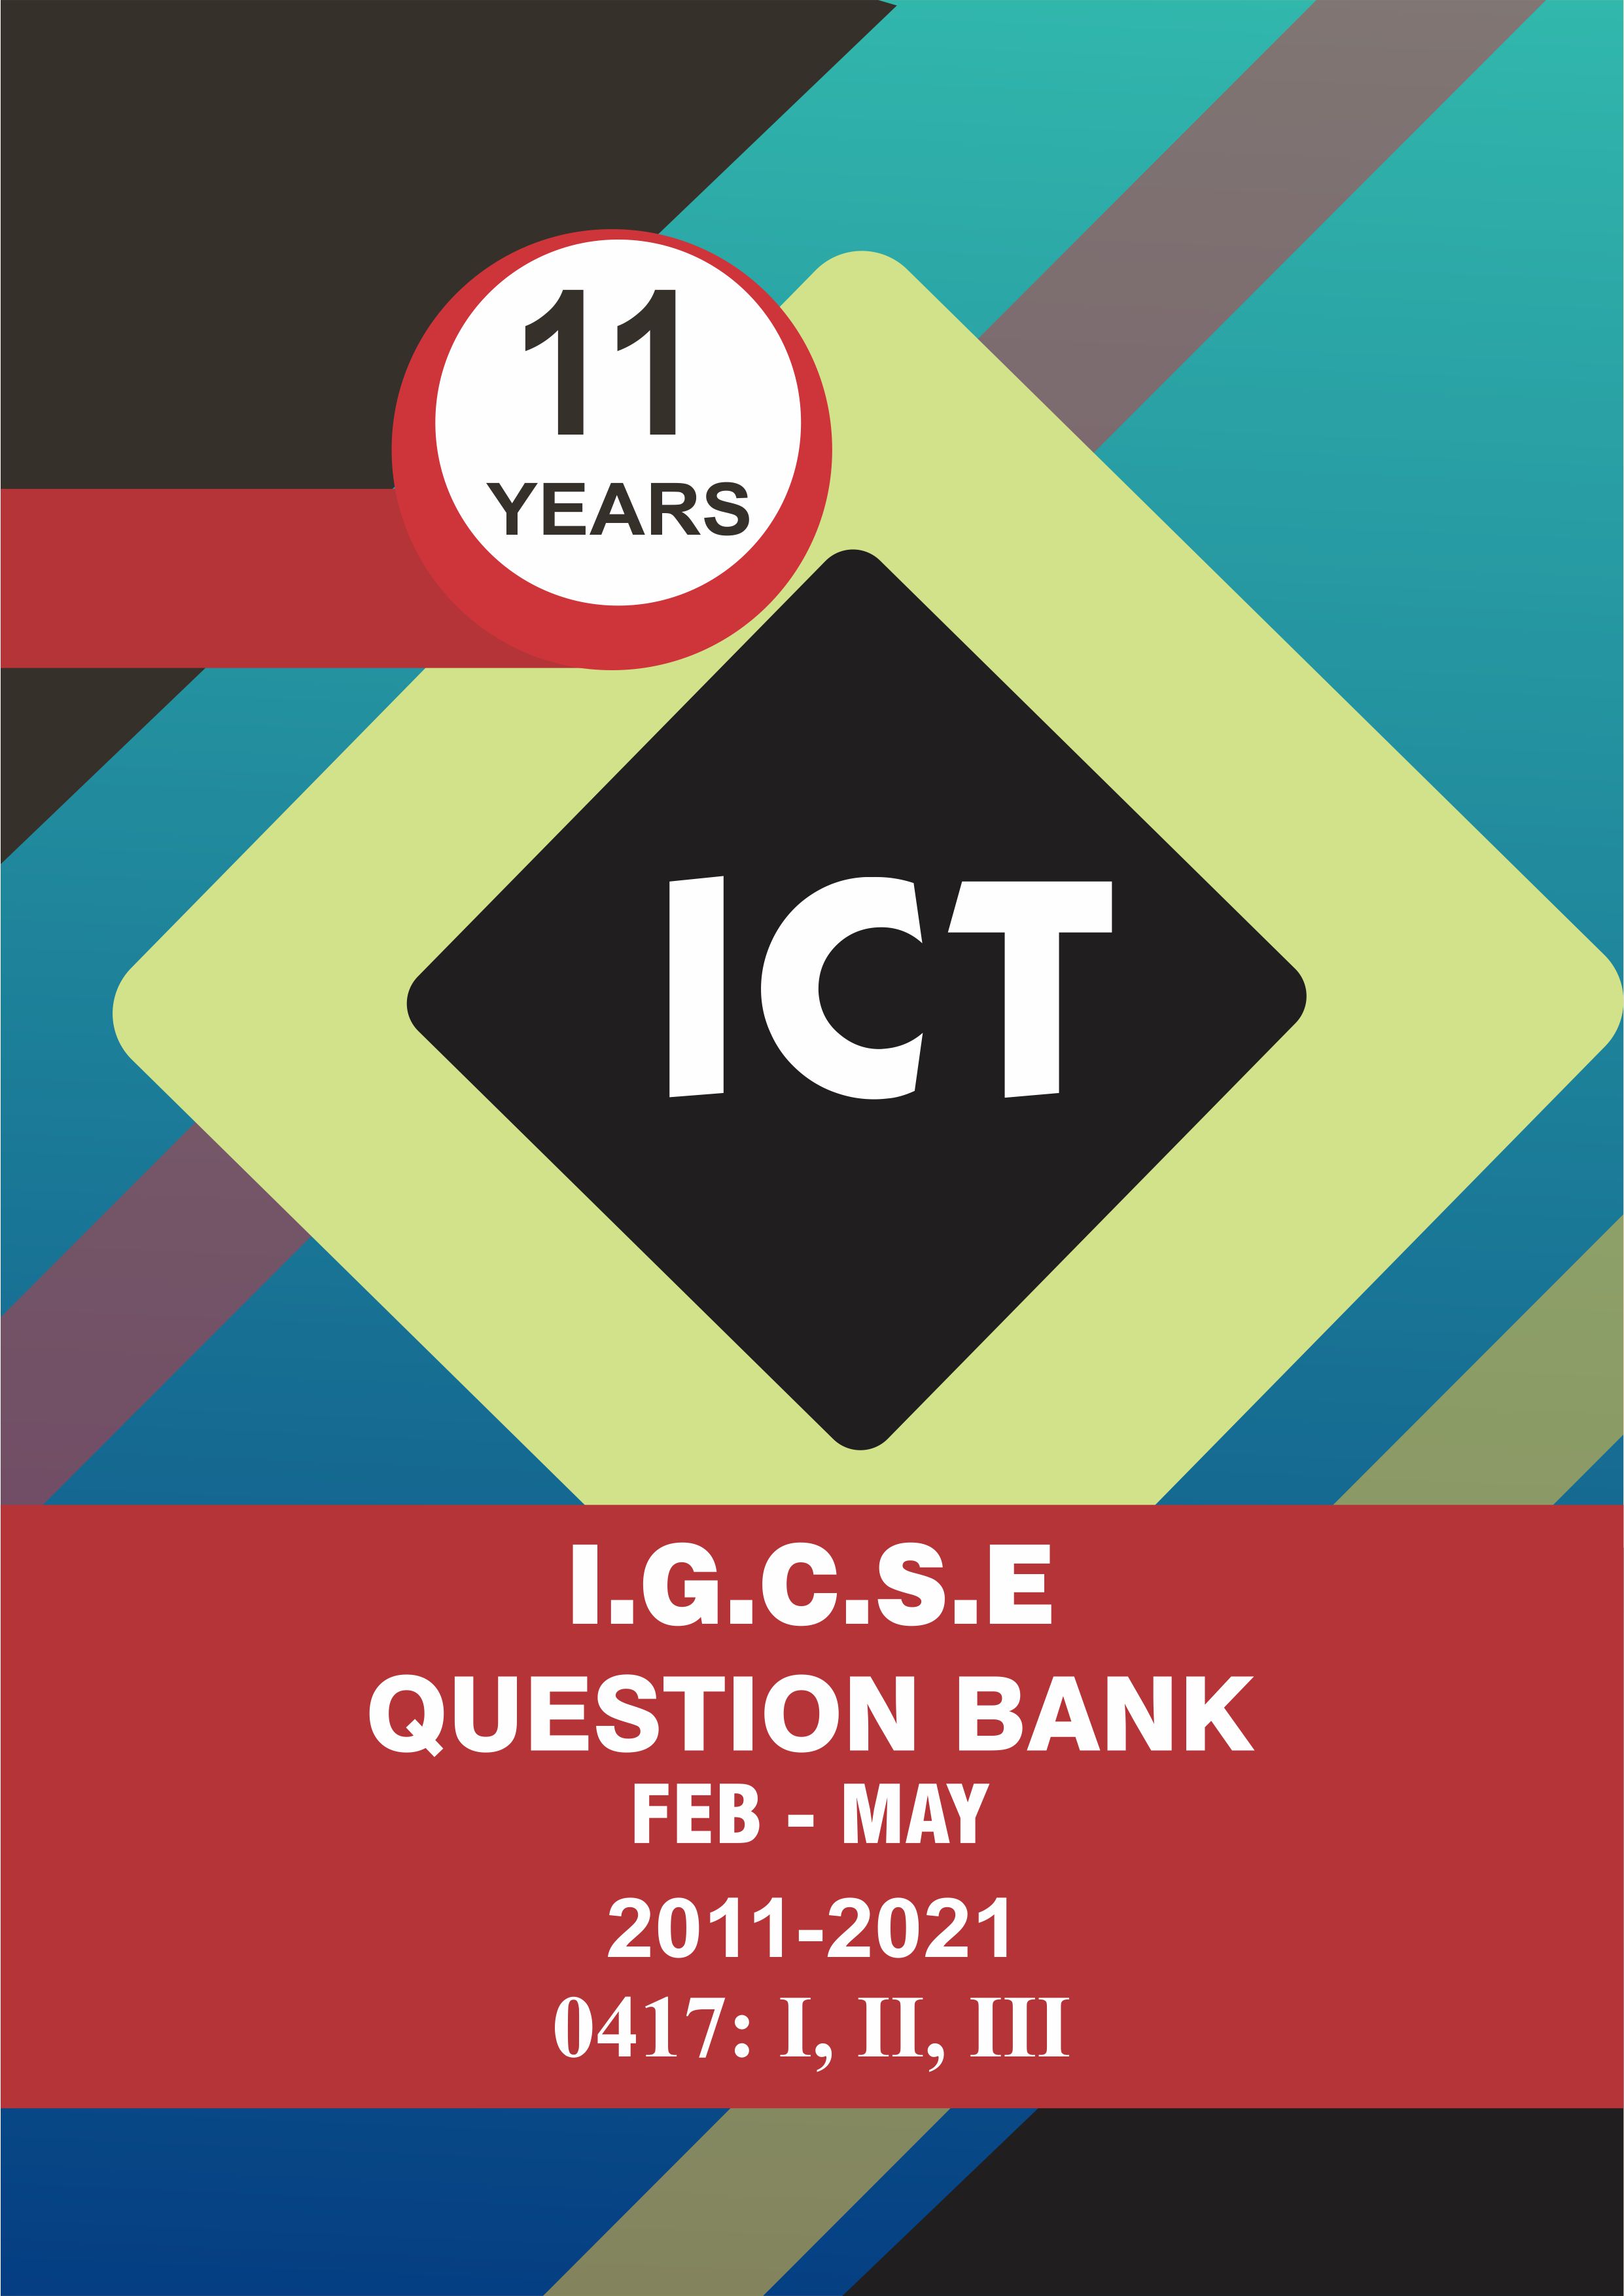 IGCSE Question Bank With Marking Schemes- Ict Paper Code 0417 Past 11 Years